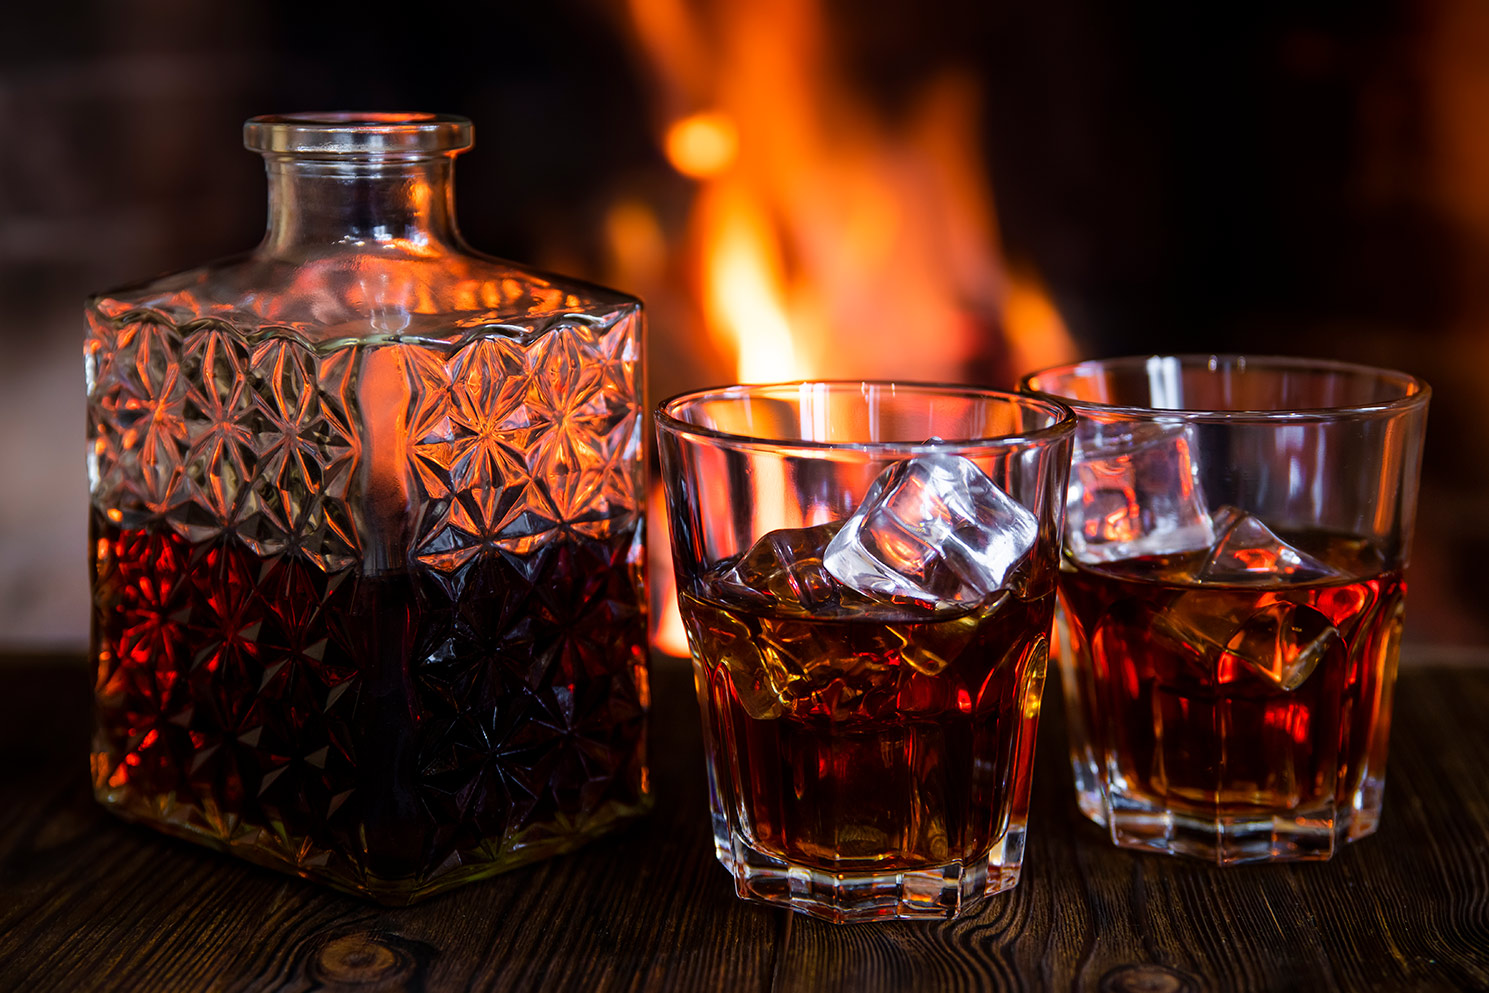 A decanter of whiskey and two glasses with ice on wood table in front of a bonfire or fireplace